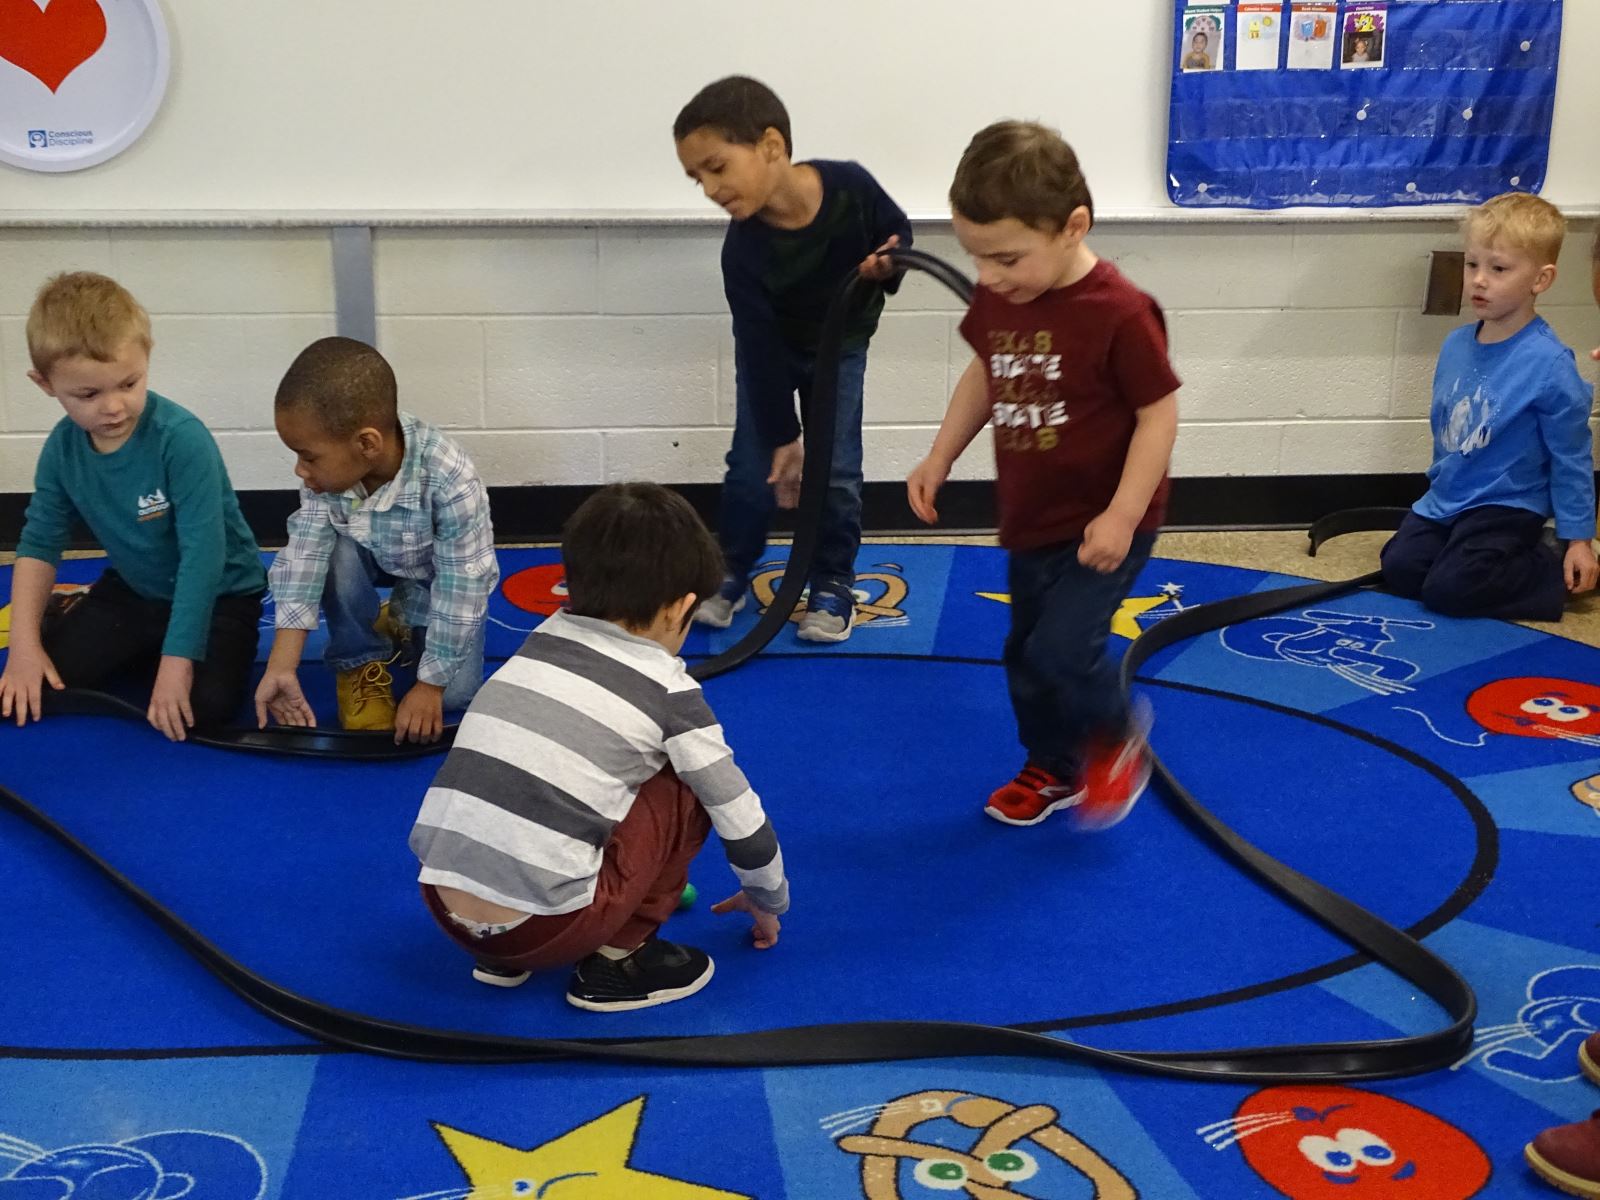 Preschool students playing in a center together